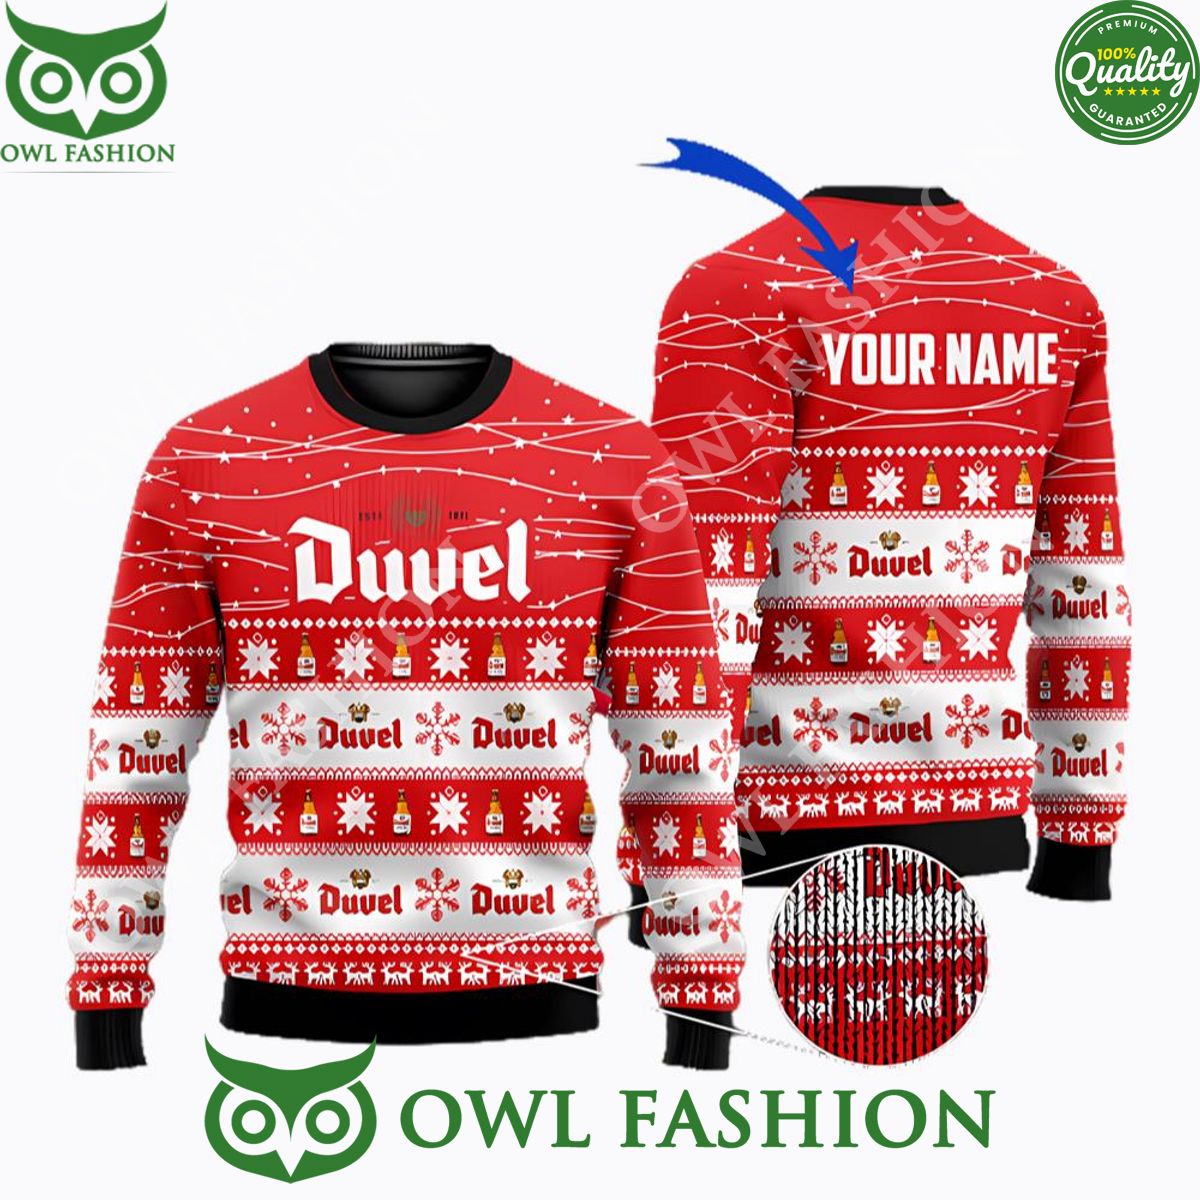 Personalized Duvel Beer Christmas Sweater Jumper You tried editing this time?